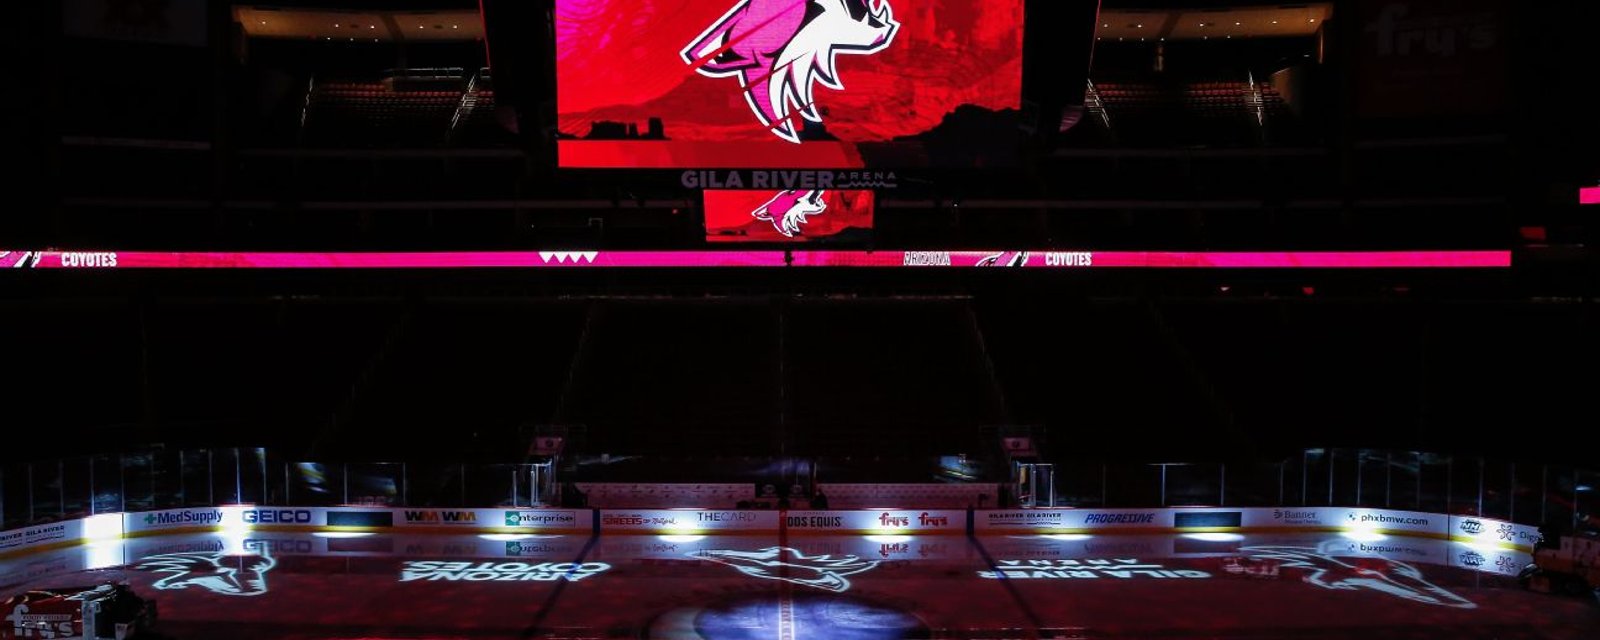 It looks like it’s finally over for the Coyotes in Arizona!